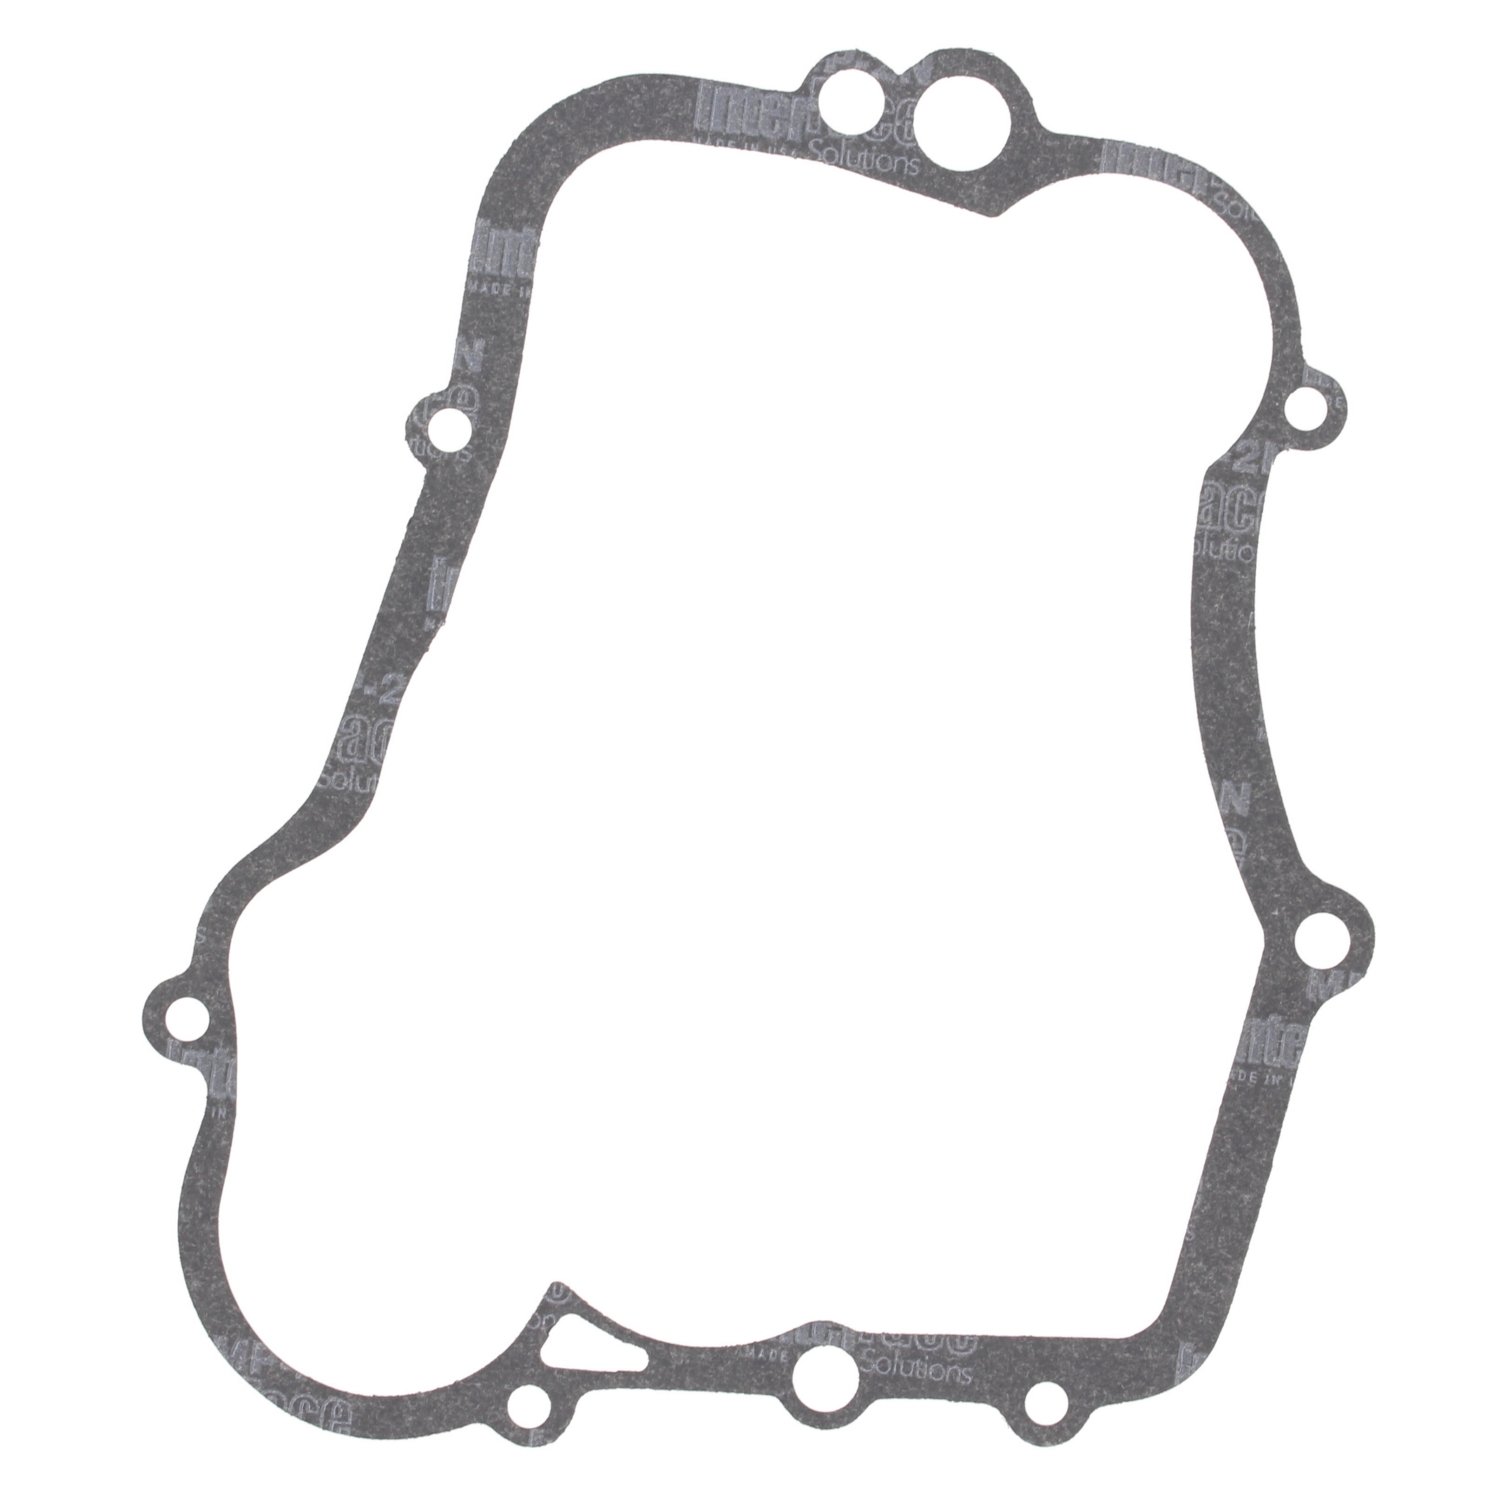 VERTEXWINDEROSA Right Side Cover Gasket | Kimpex USA